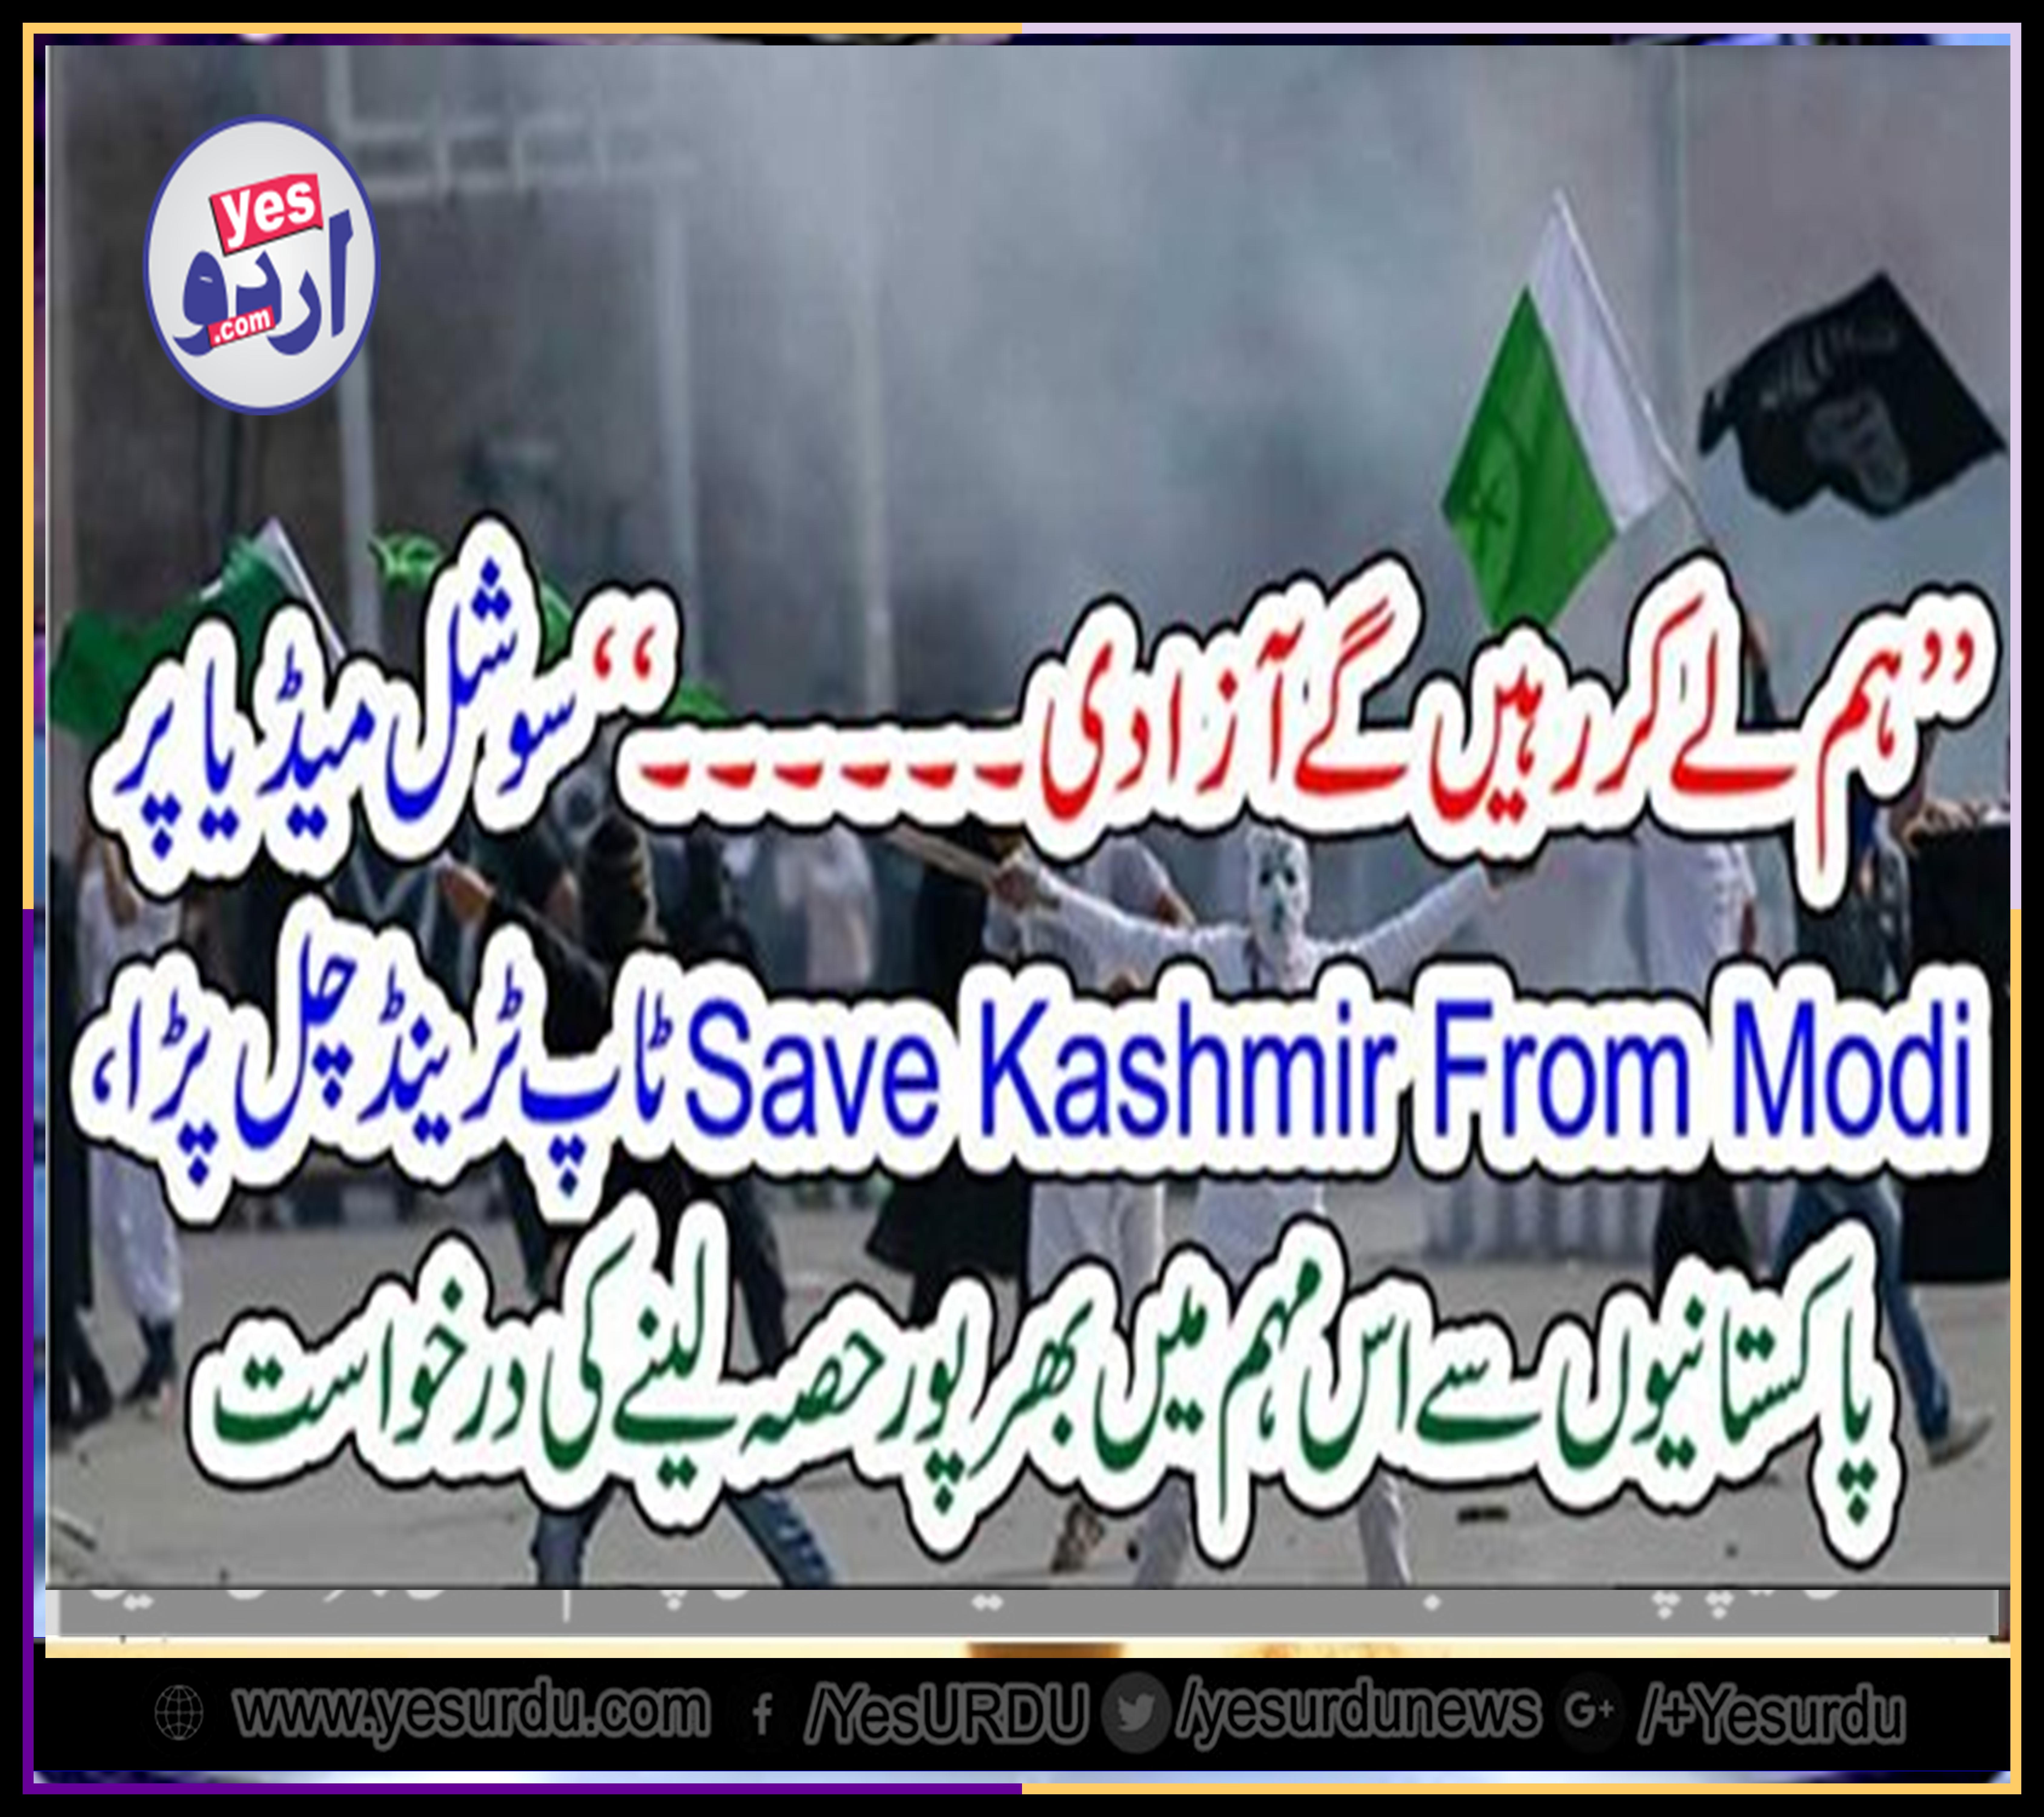 save, kashmir, from, moodi, new, top, trend, on, Twitter, we, will, get, freedom, at, last, Pakistanis, are, requested, to, participate, to, viral, hash tag, in, Pakistan